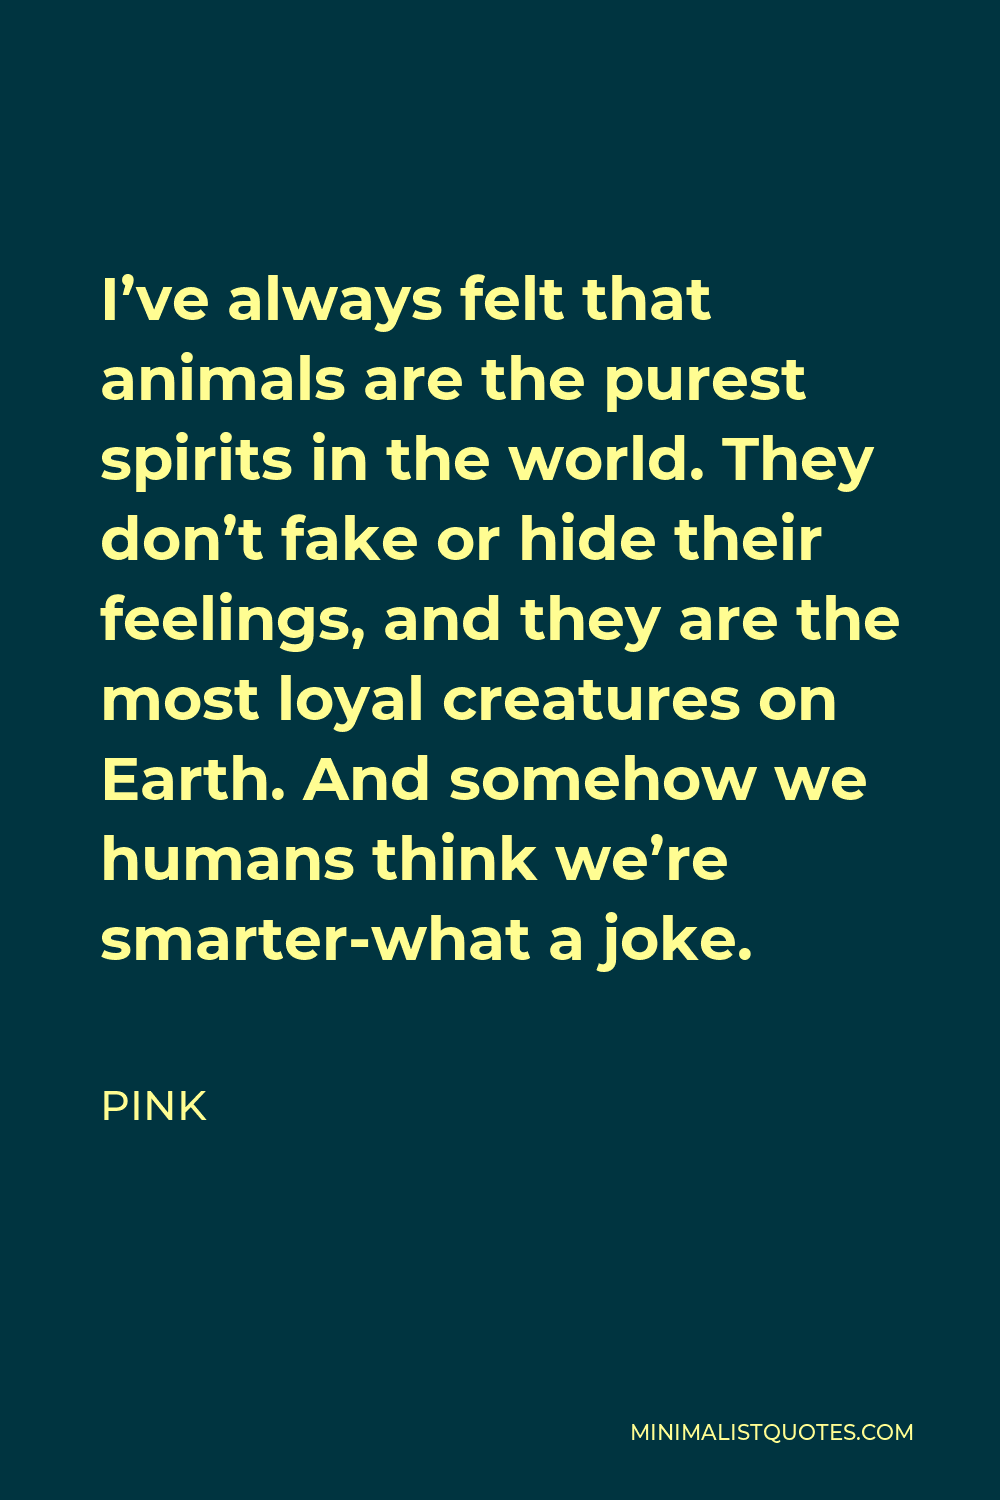 Pink Quote - I’ve always felt that animals are the purest spirits in the world. They don’t fake or hide their feelings, and they are the most loyal creatures on Earth. And somehow we humans think we’re smarter-what a joke.